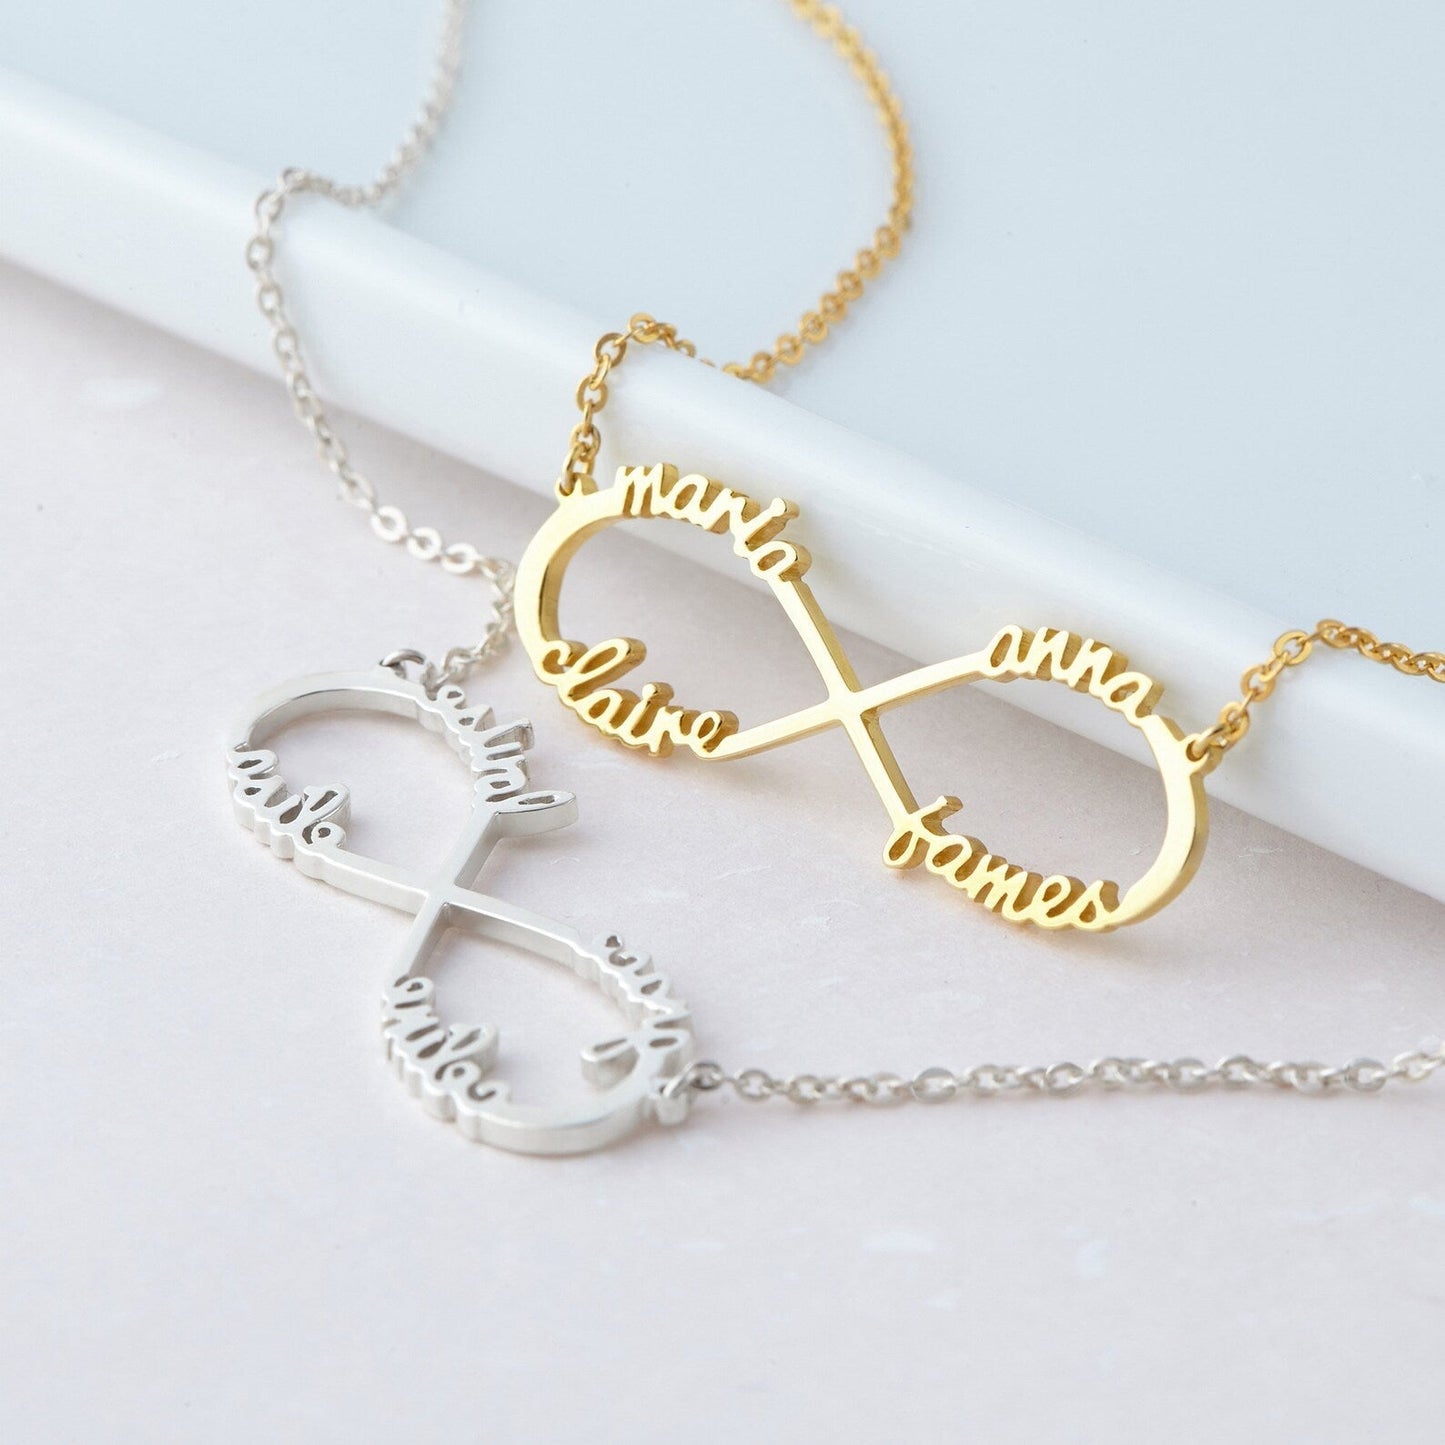 Personalized Infinity Necklace With Names